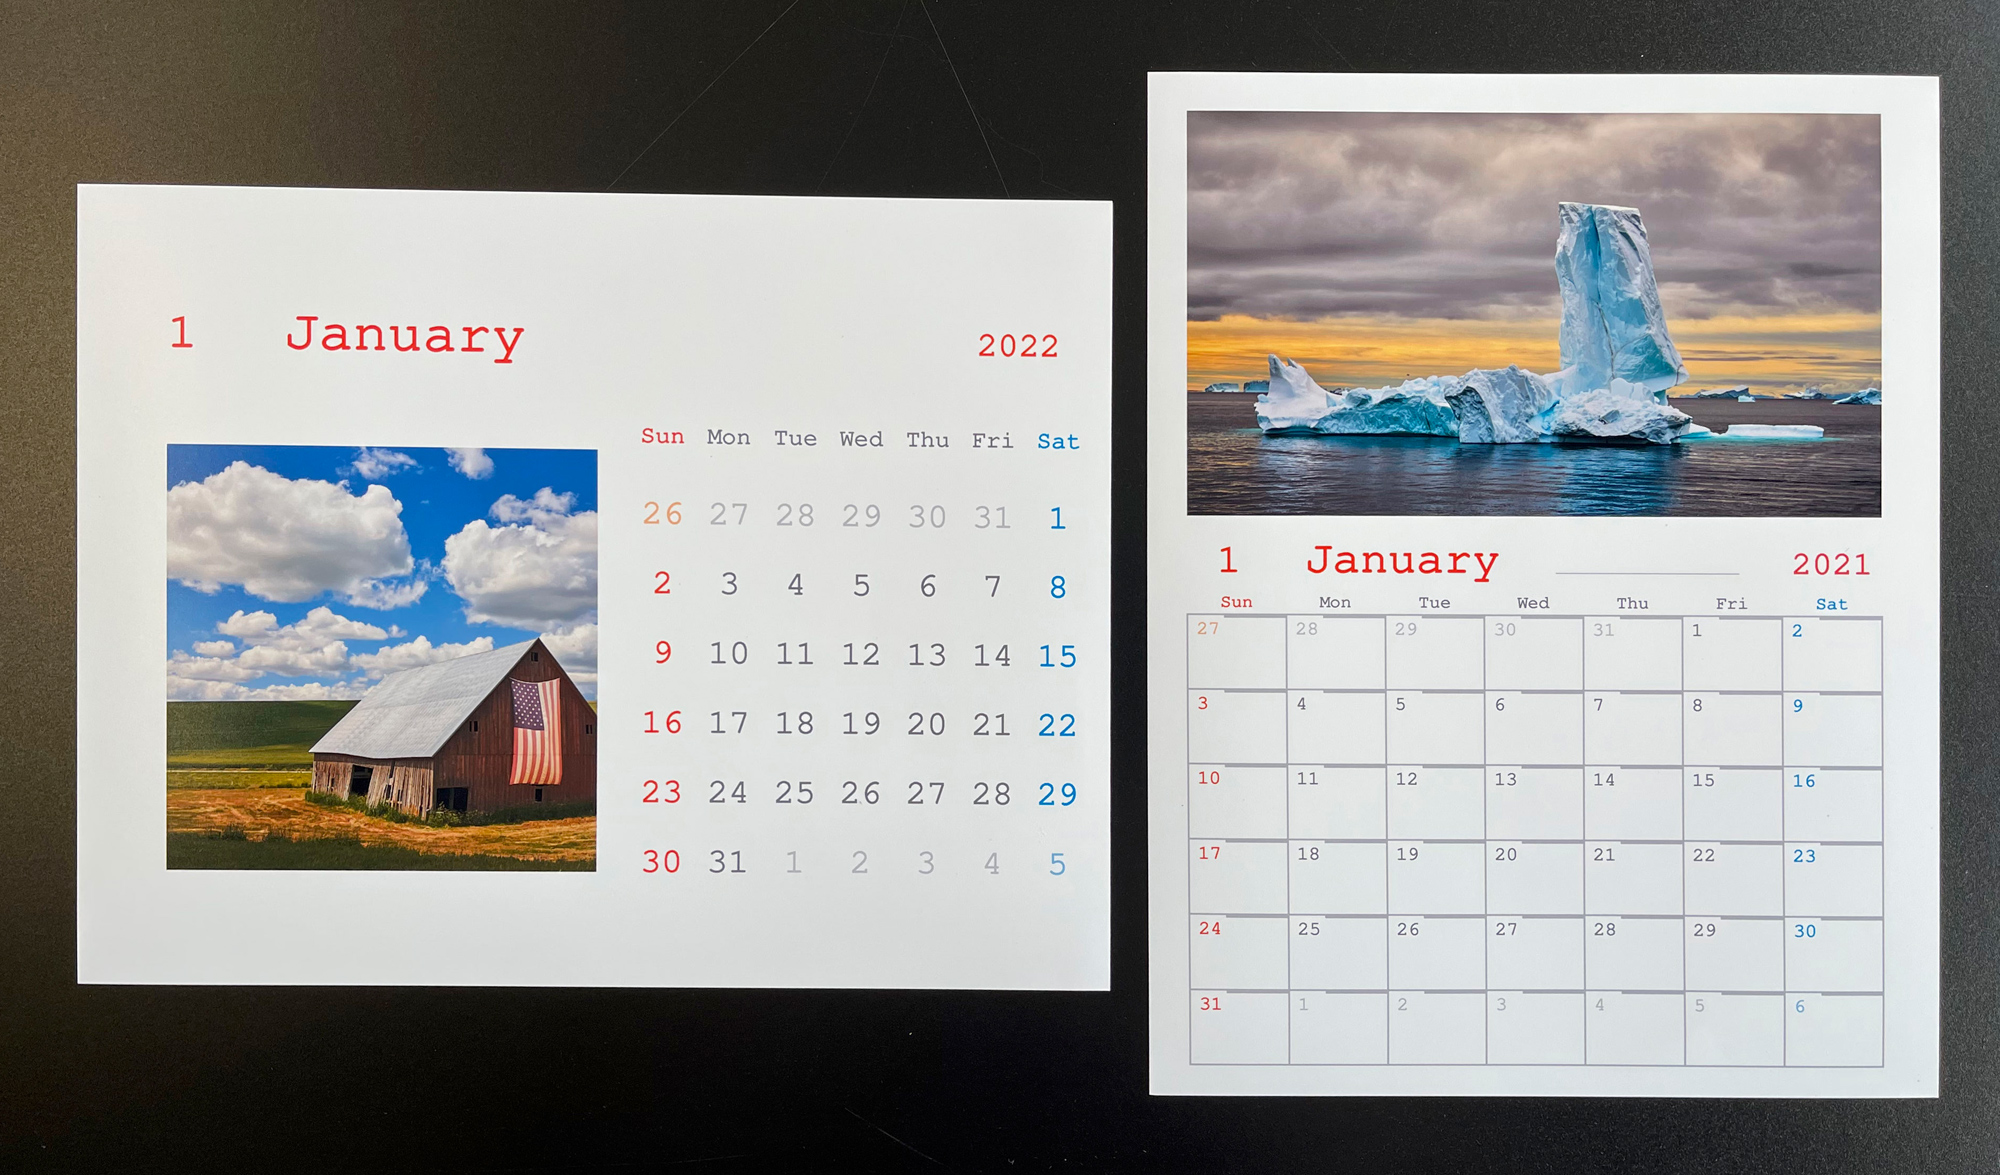 Calendar templates that are printed directly from the control panel